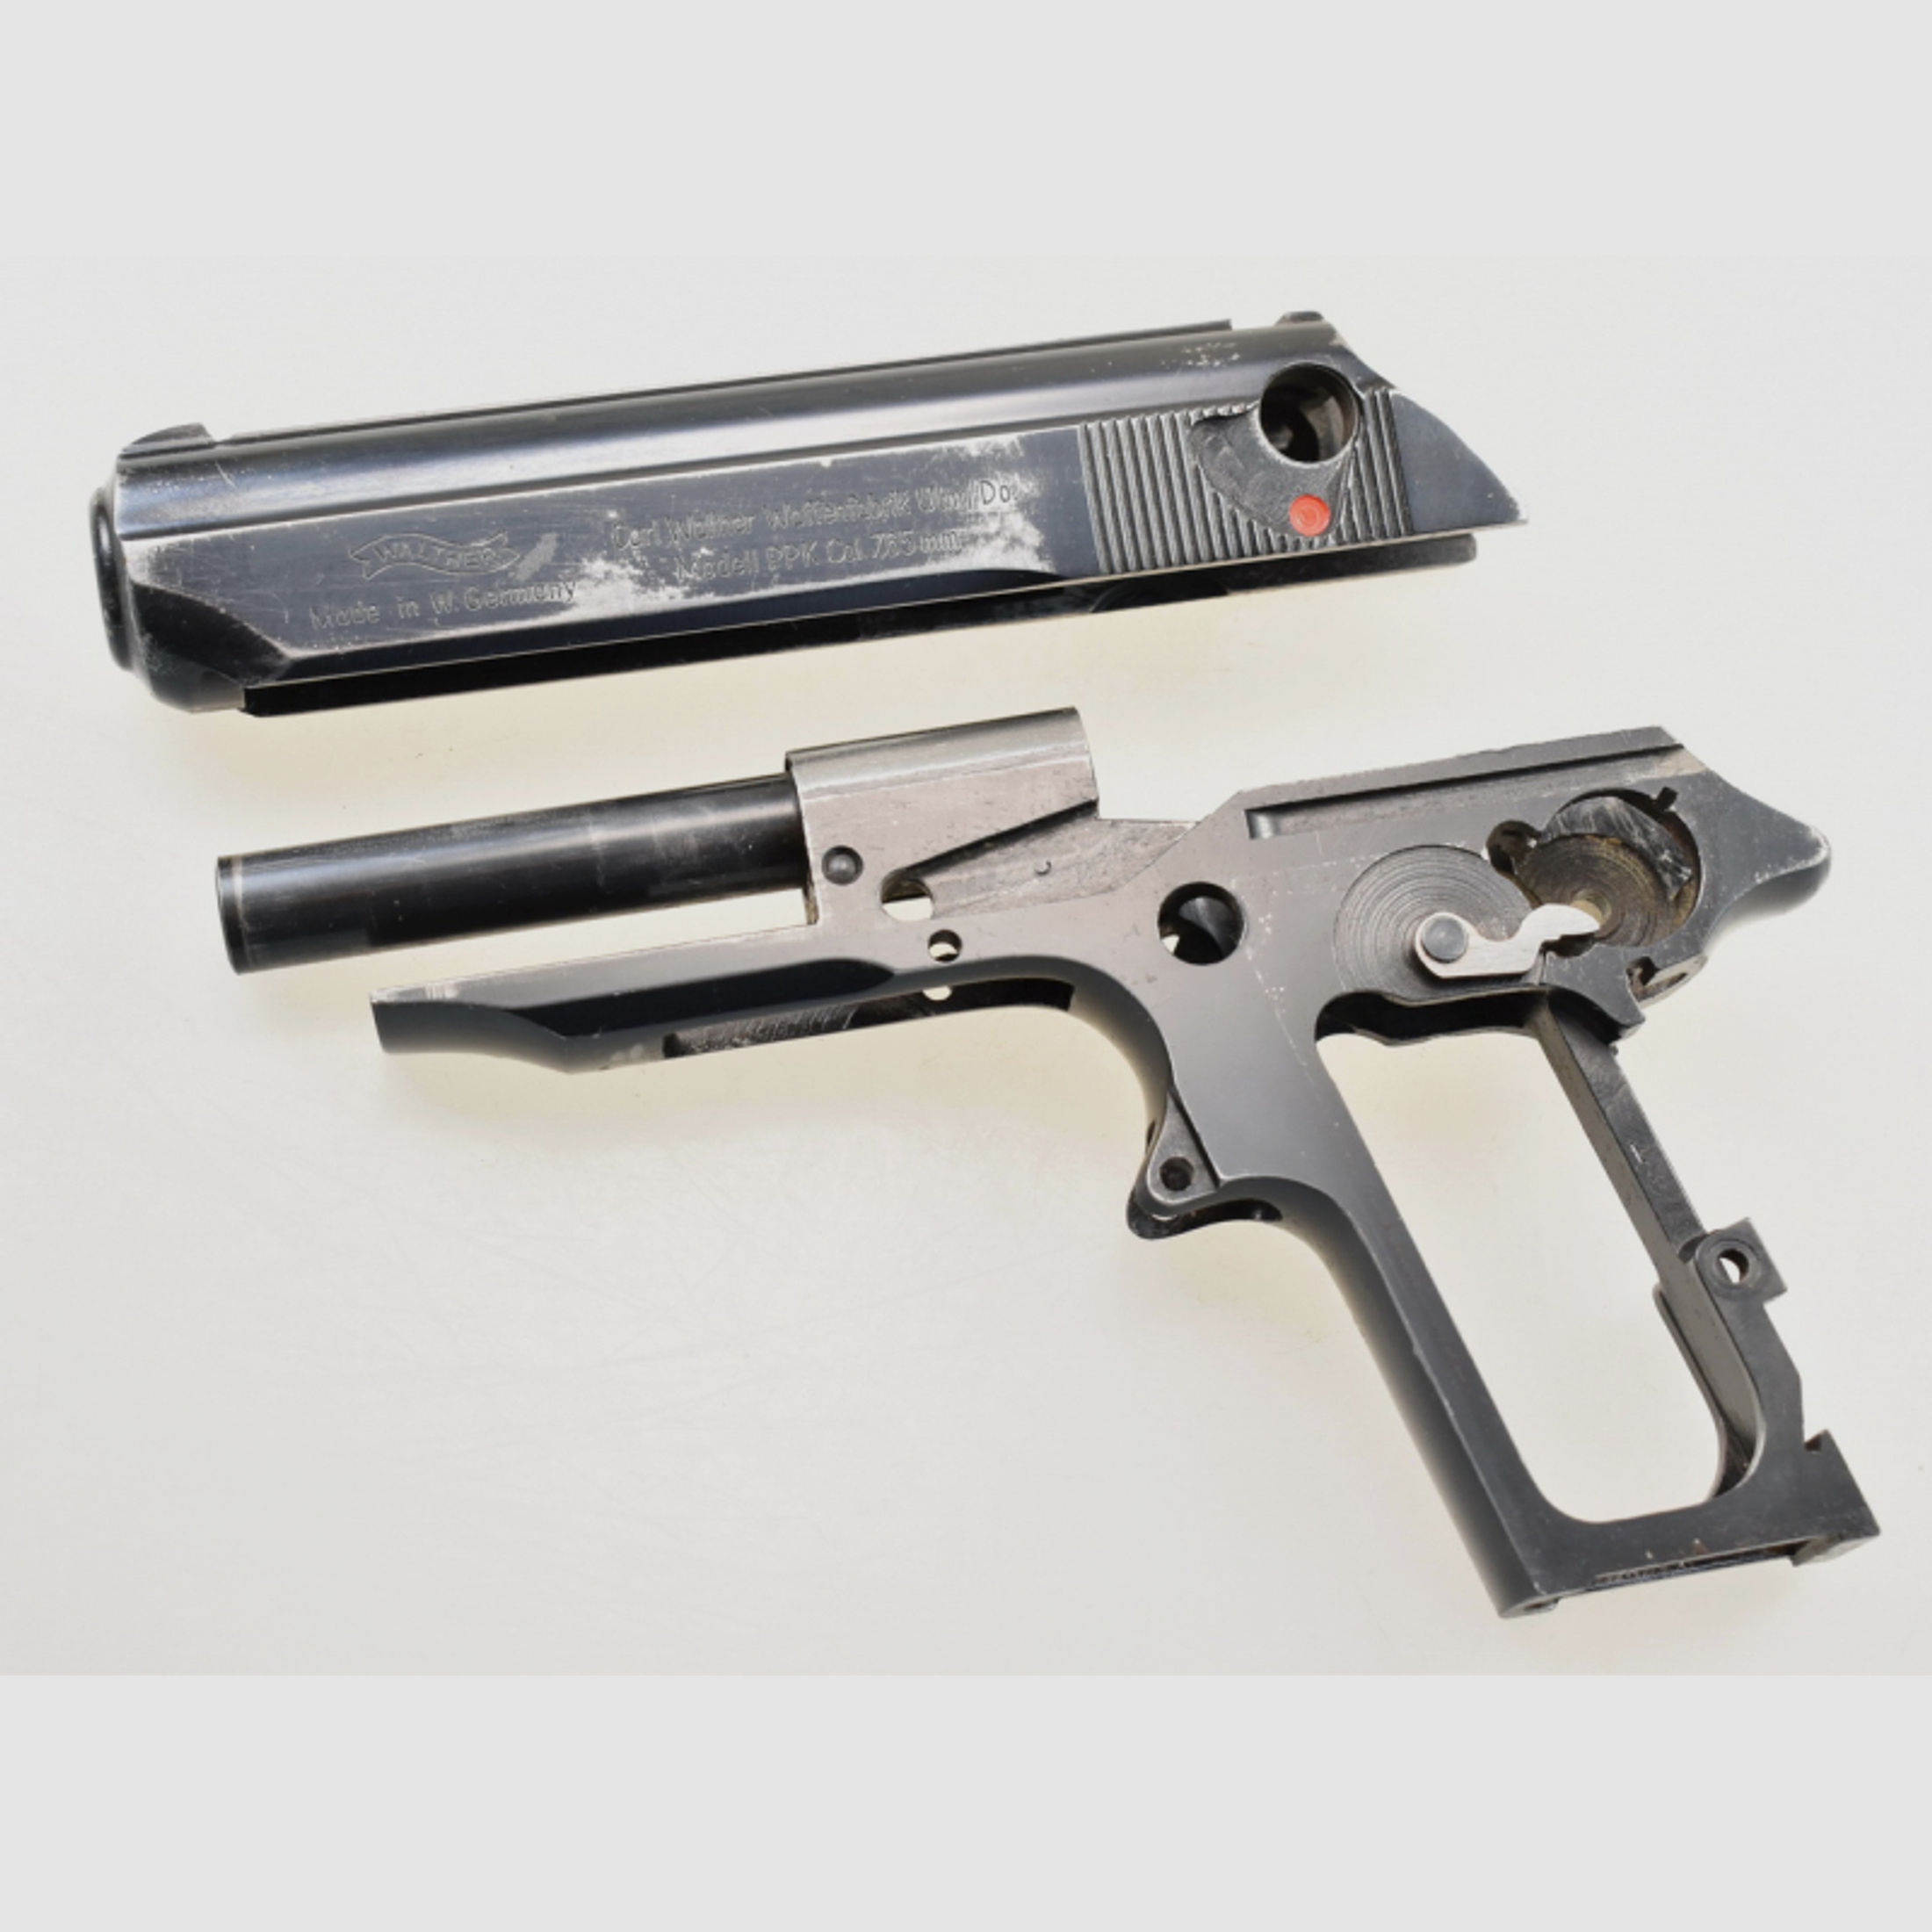 WALTHER / ULM Pistole Modell PPK im Kaliber 7,65mm Browning